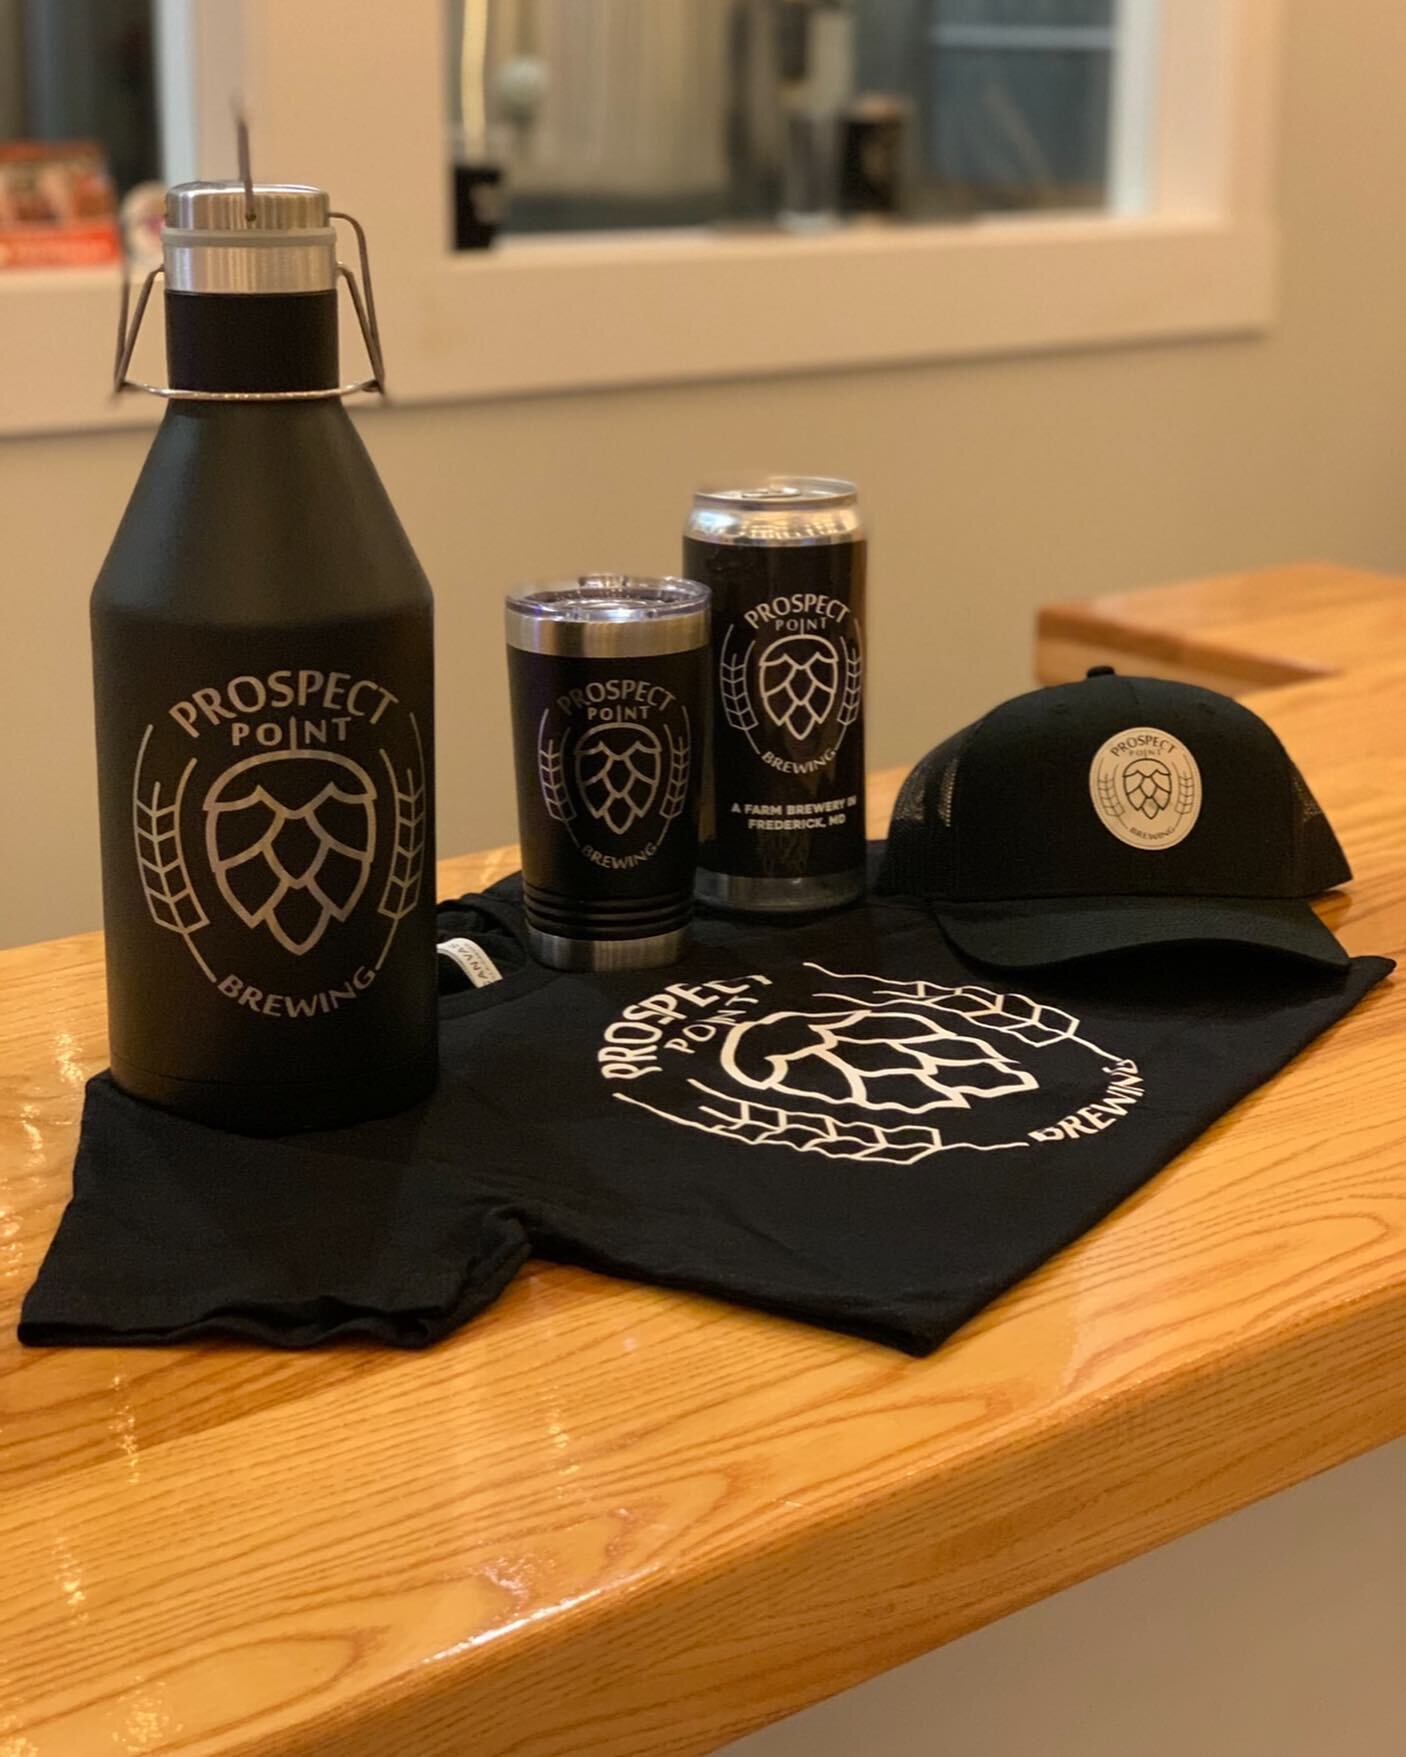 It&rsquo;s a lot easier to start the day when you know it could end with a beer! We are open today with awesome food and music to kick off your weekend! Be sure to check out the PP merch while you&rsquo;re here too!

Friday, 1/13 Hours 3-9
Food @lapa